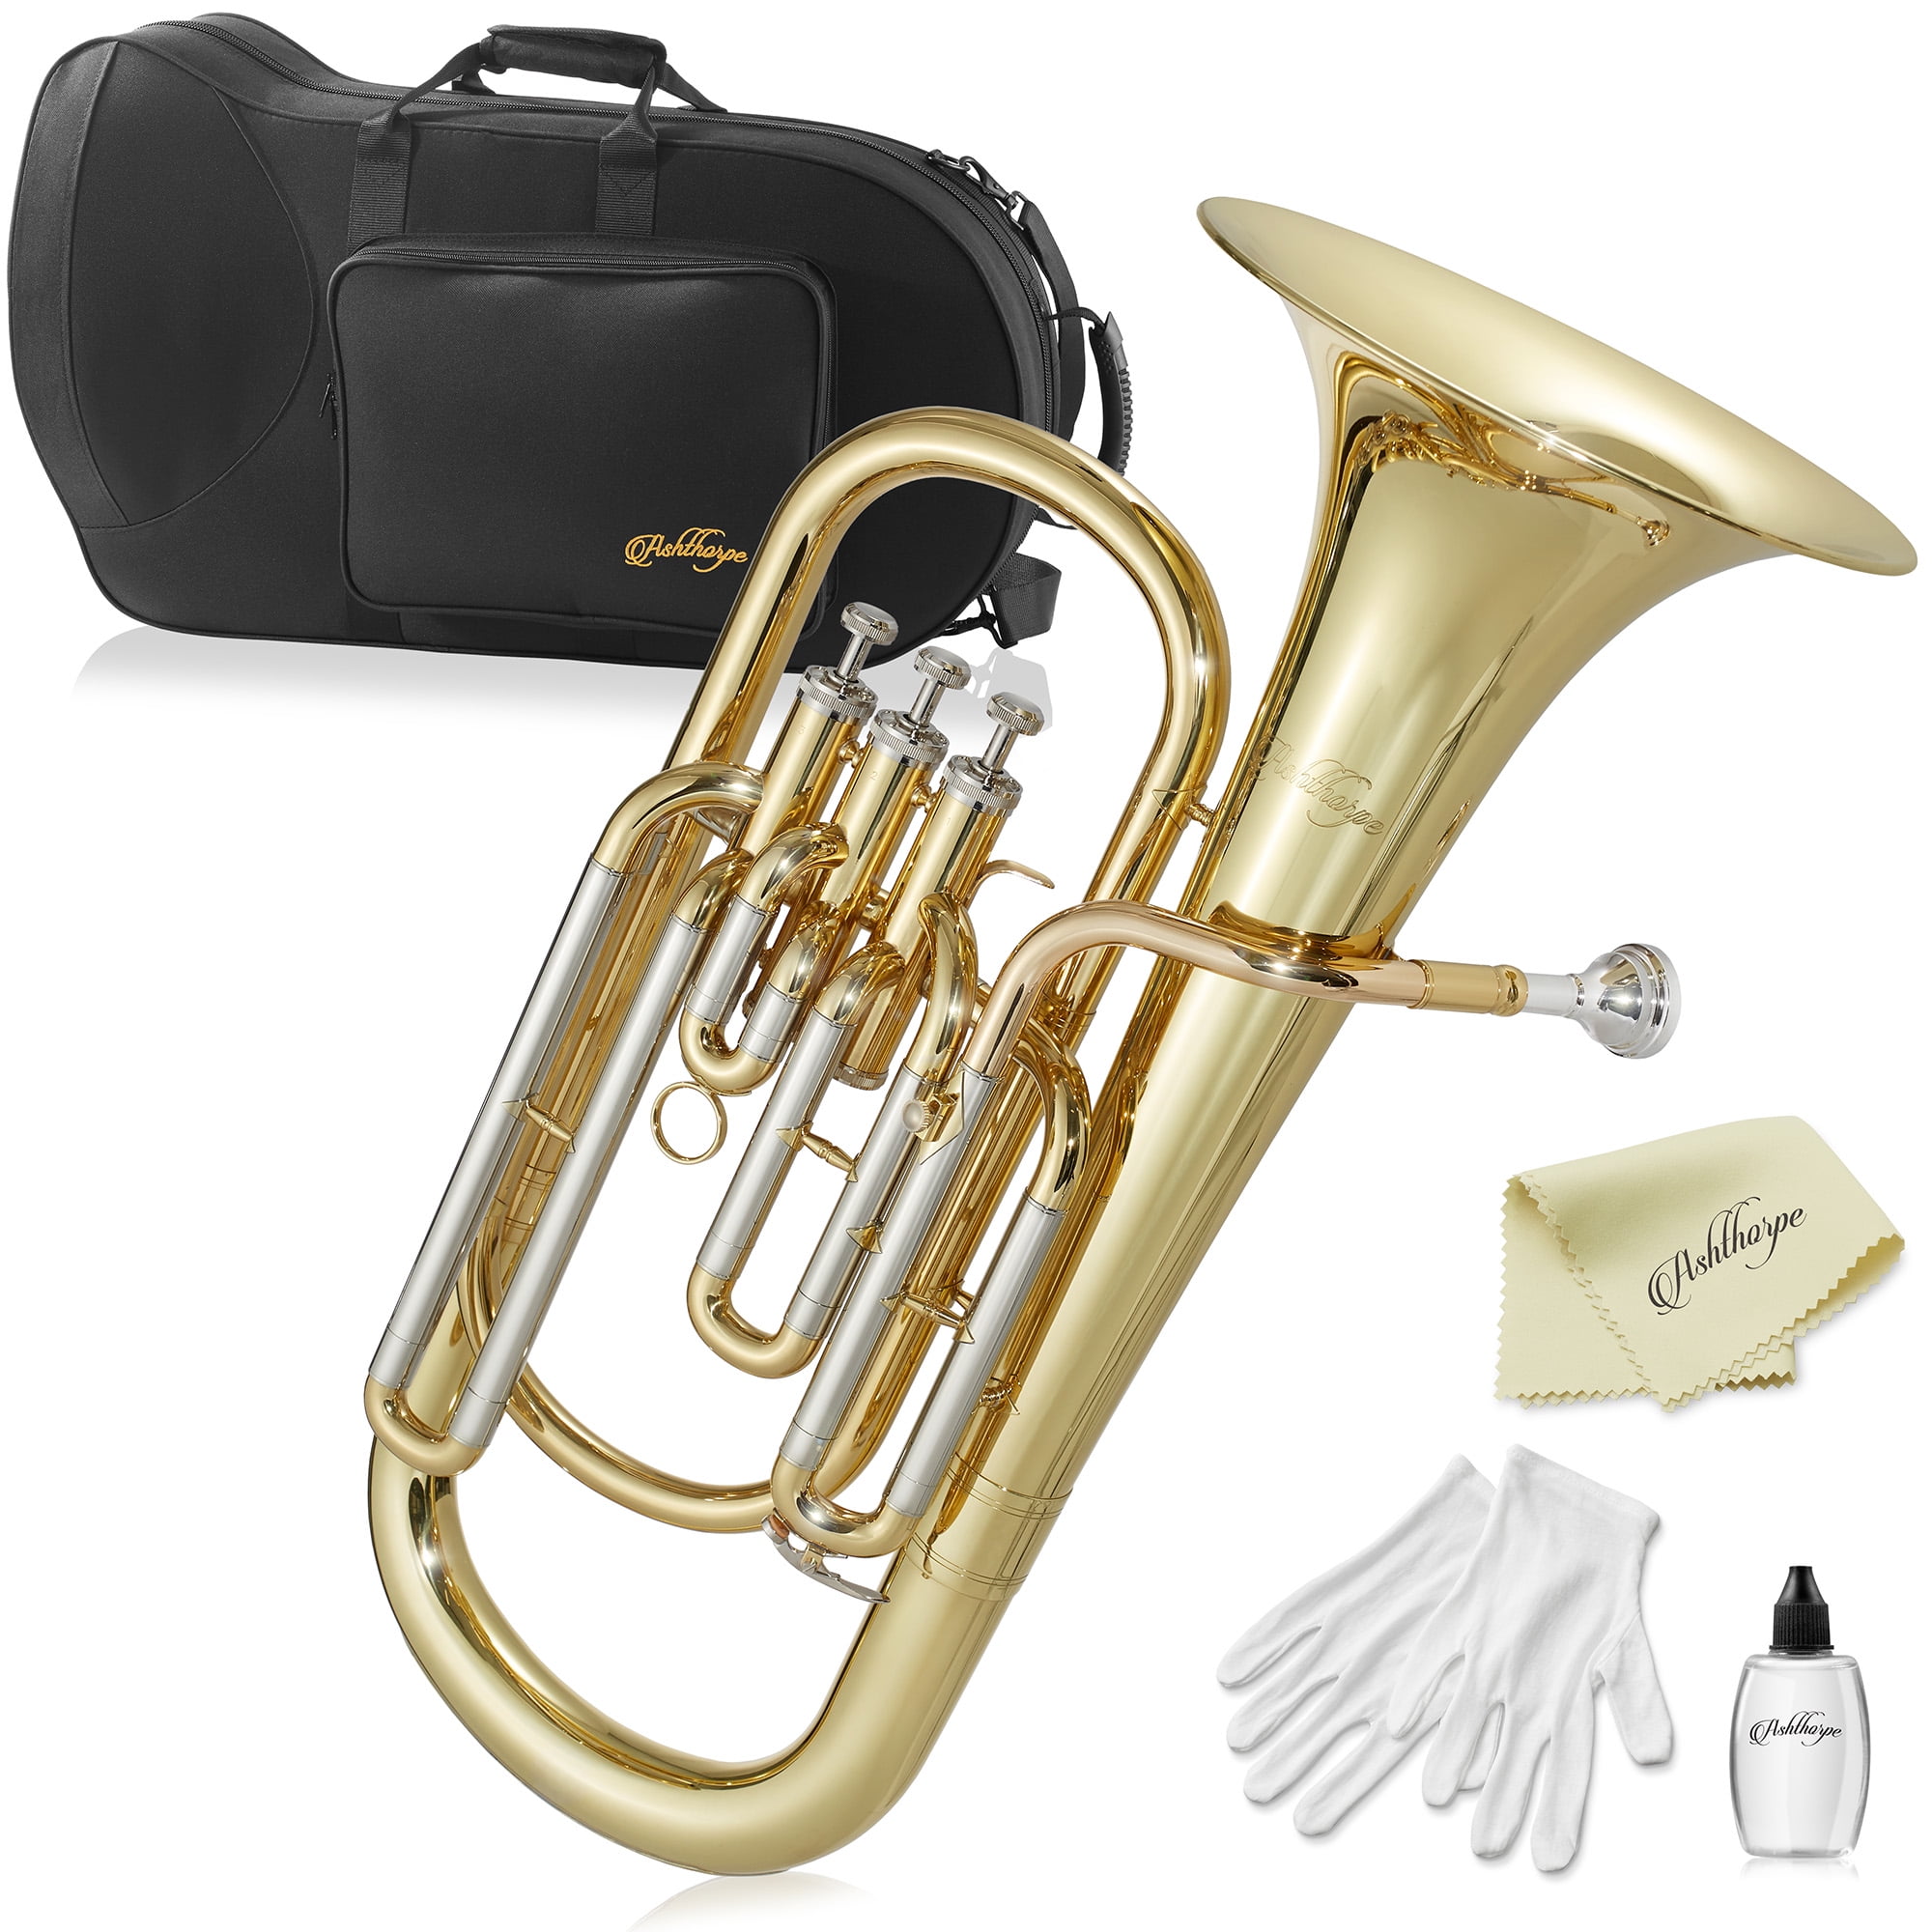 Advanced Monel Pistons Bb Baritone Horn w/Case and Mouthpiece-Nickel Plated Finish 